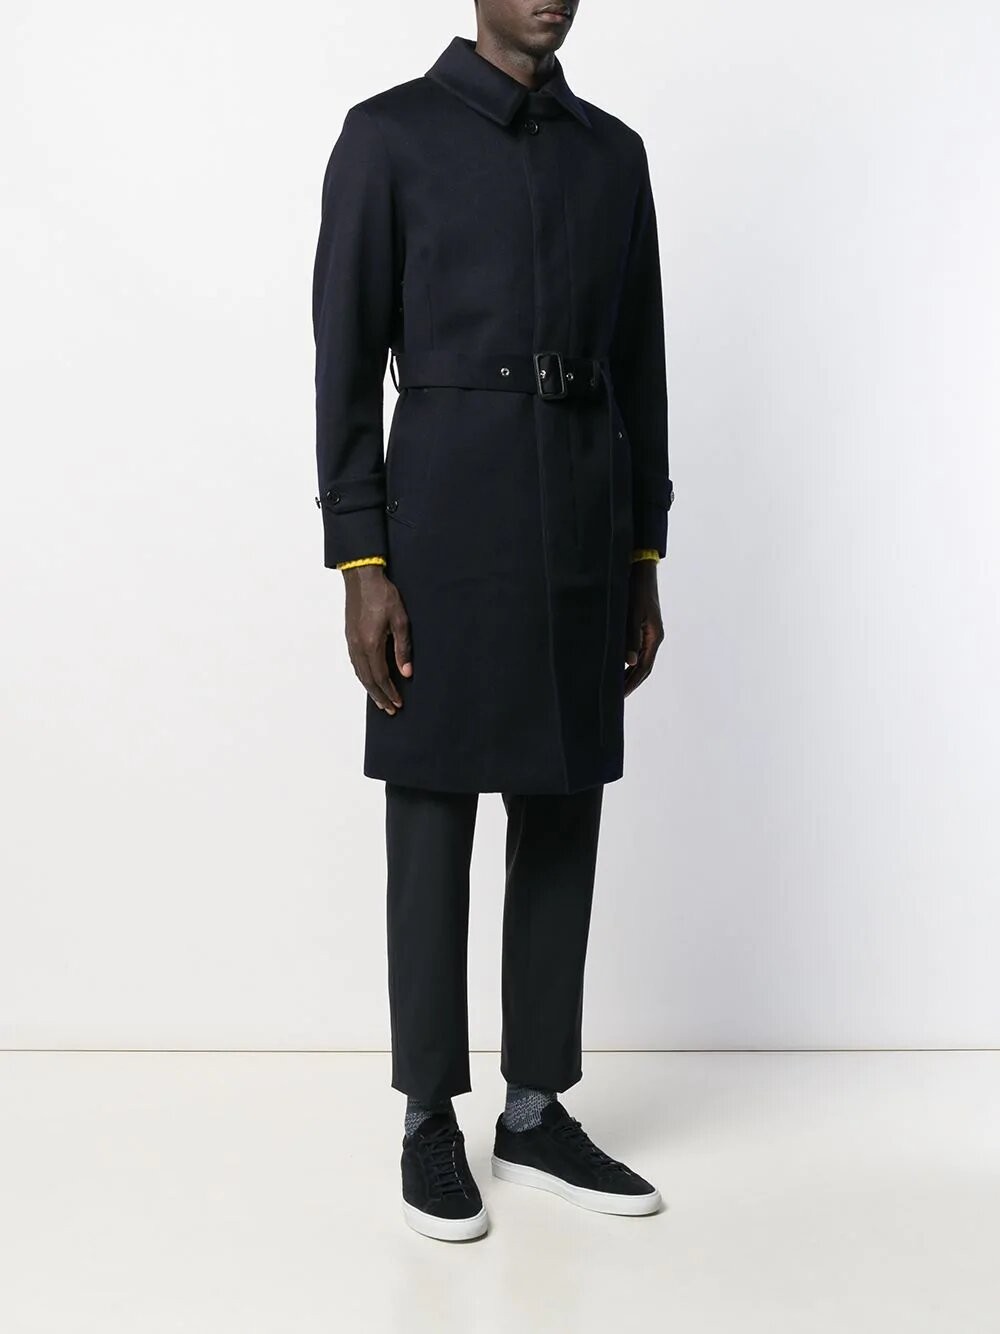 Mackintosh Downfield GM-1005F Belted Coat MOP5140 Black - New Collection Autumn Winter 2019 - 2020